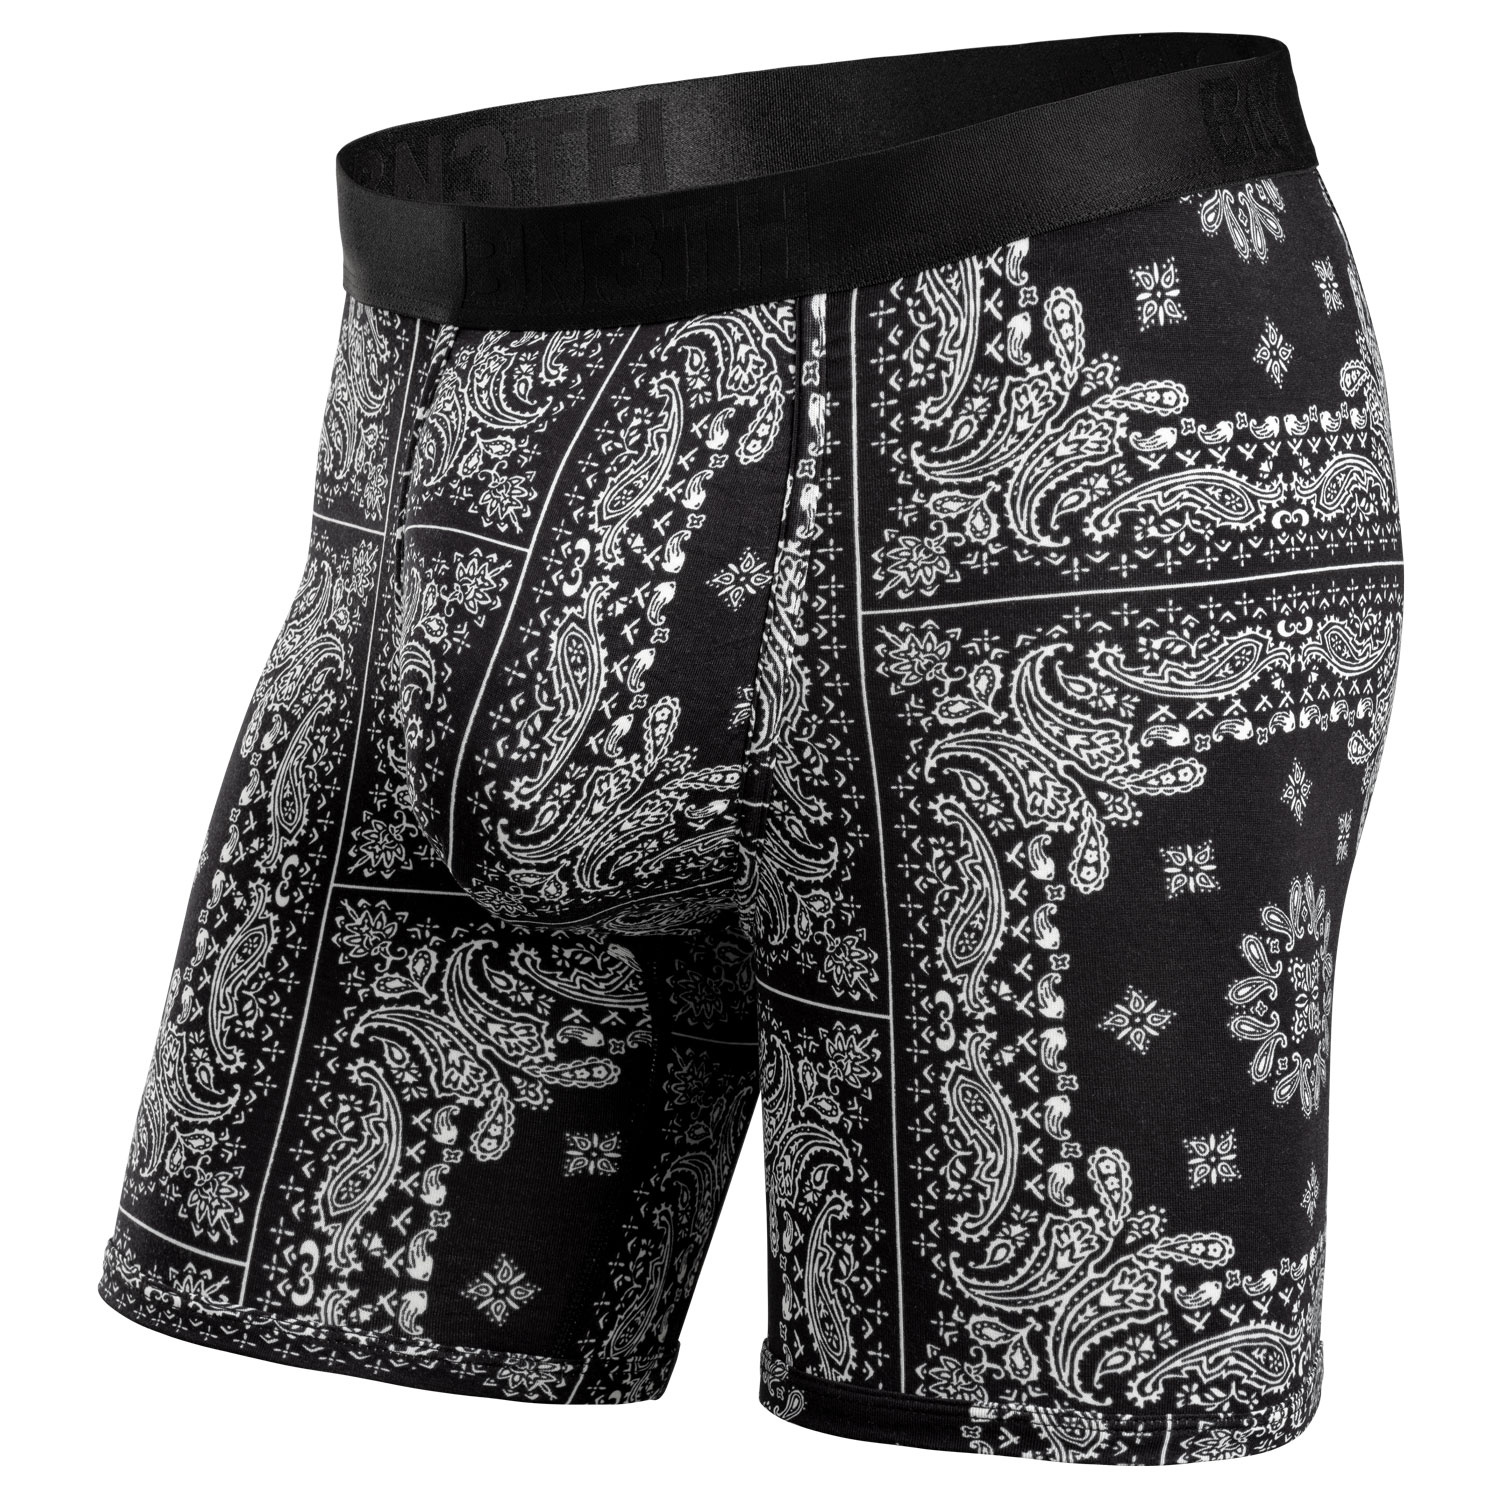 BN3TH Outset Boxer Brief - Men's - Clothing